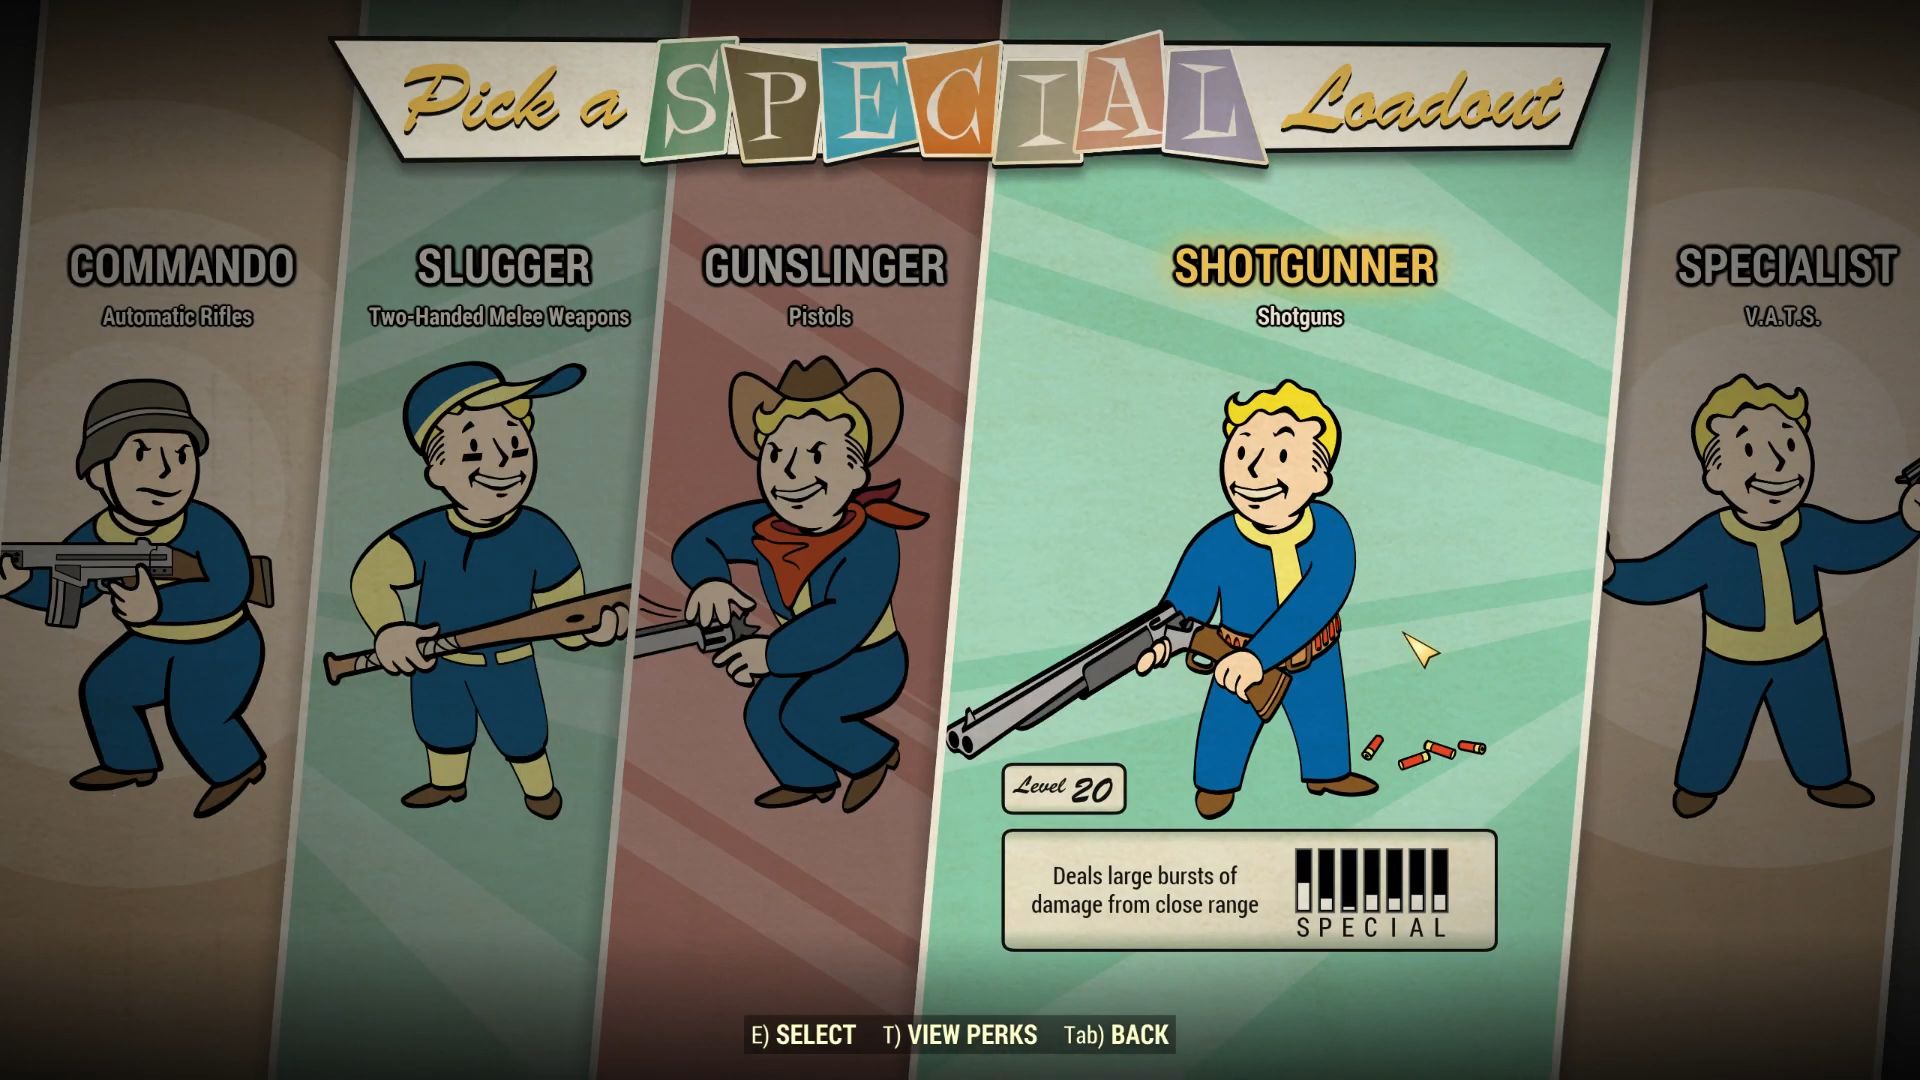 The Shotgunner loadout in Fallout 76